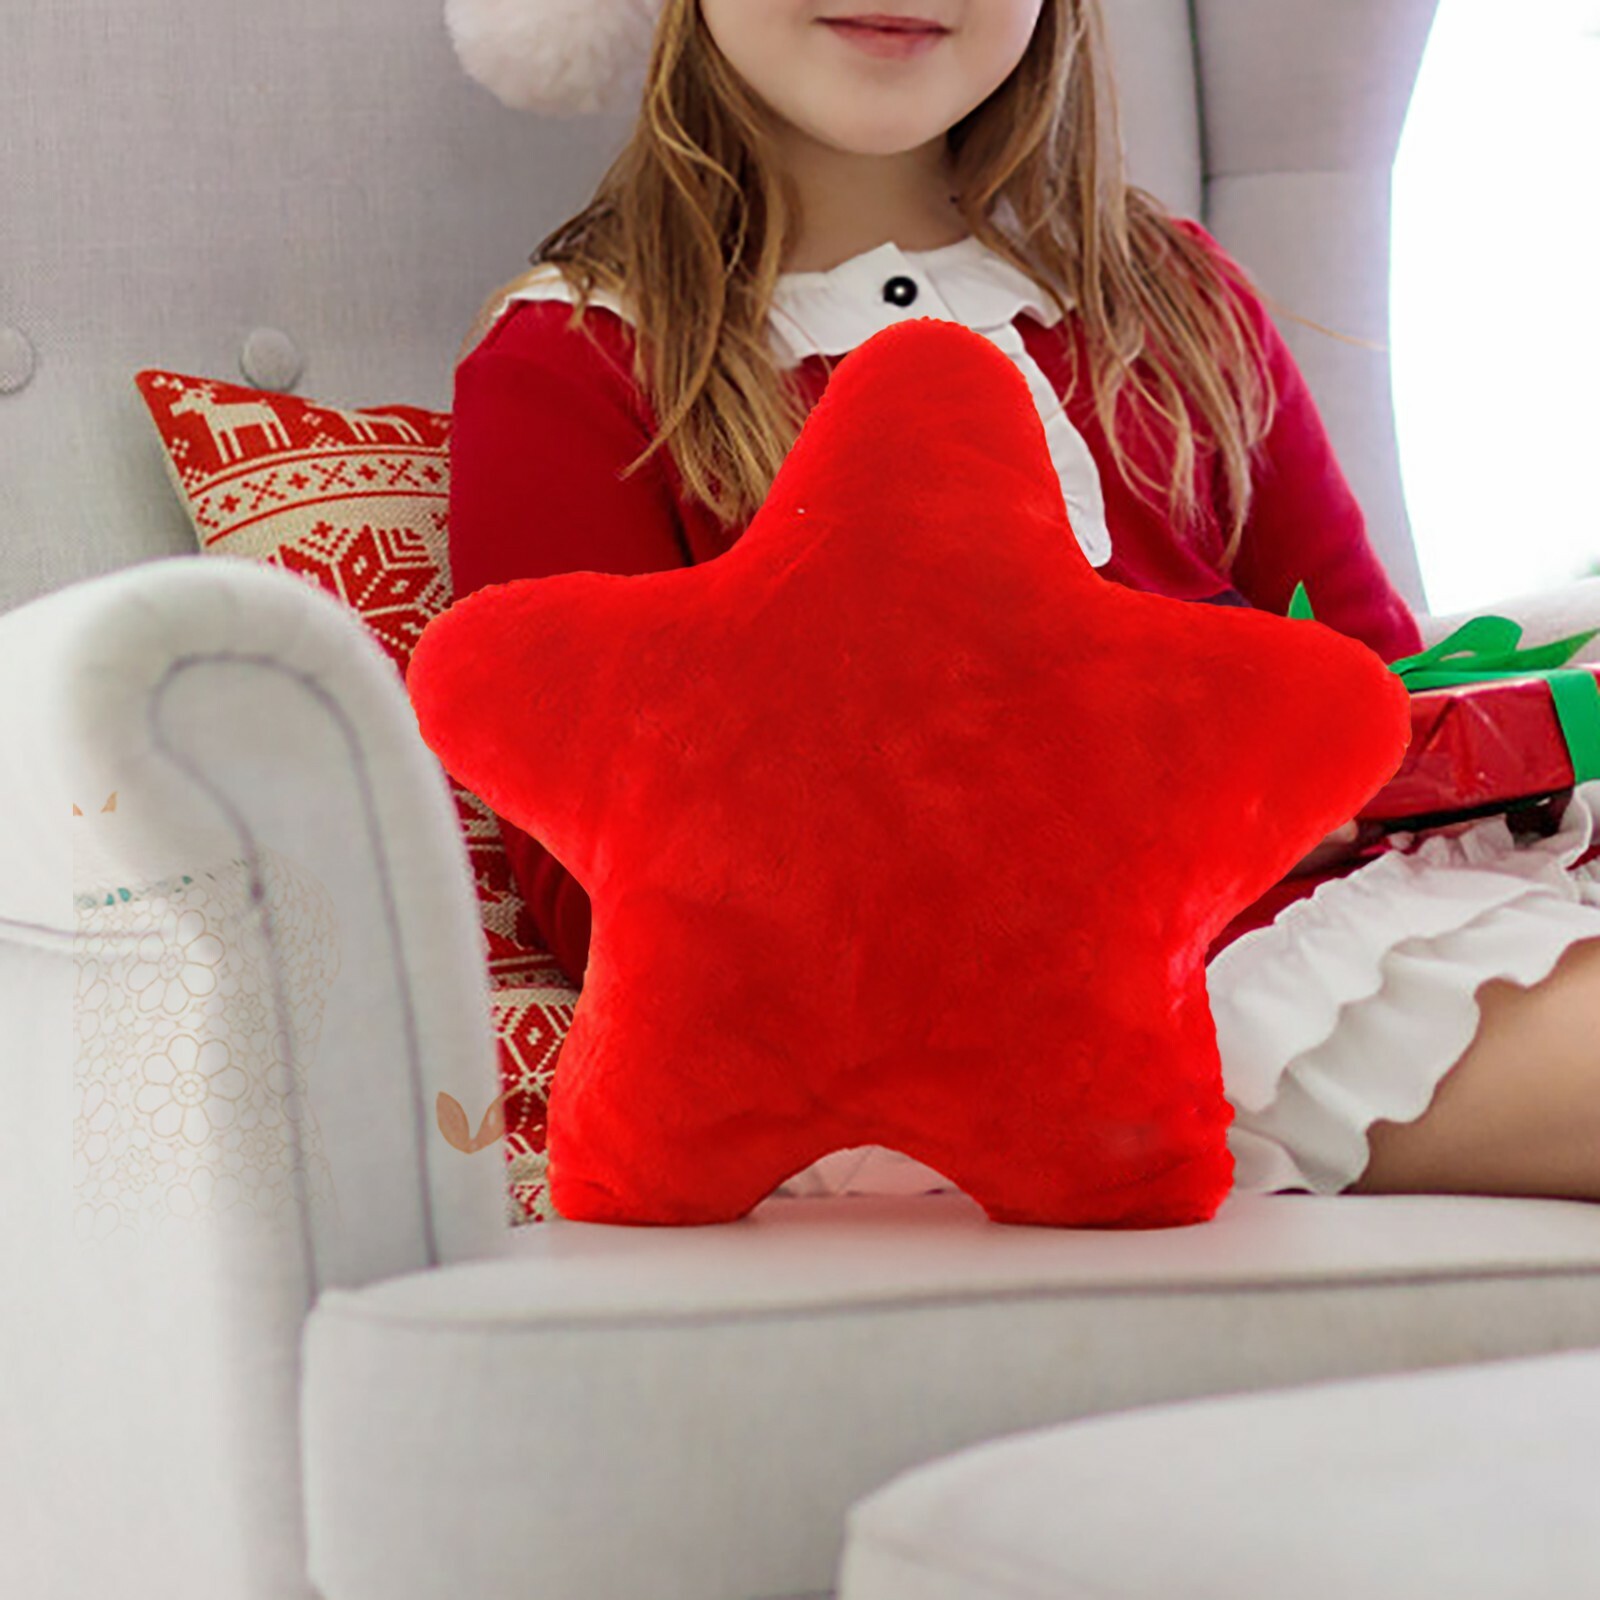 CozyPlushies Cozy Five-Pointed Star Plush Pillow - Perfect Gift for Kids & Home Decor